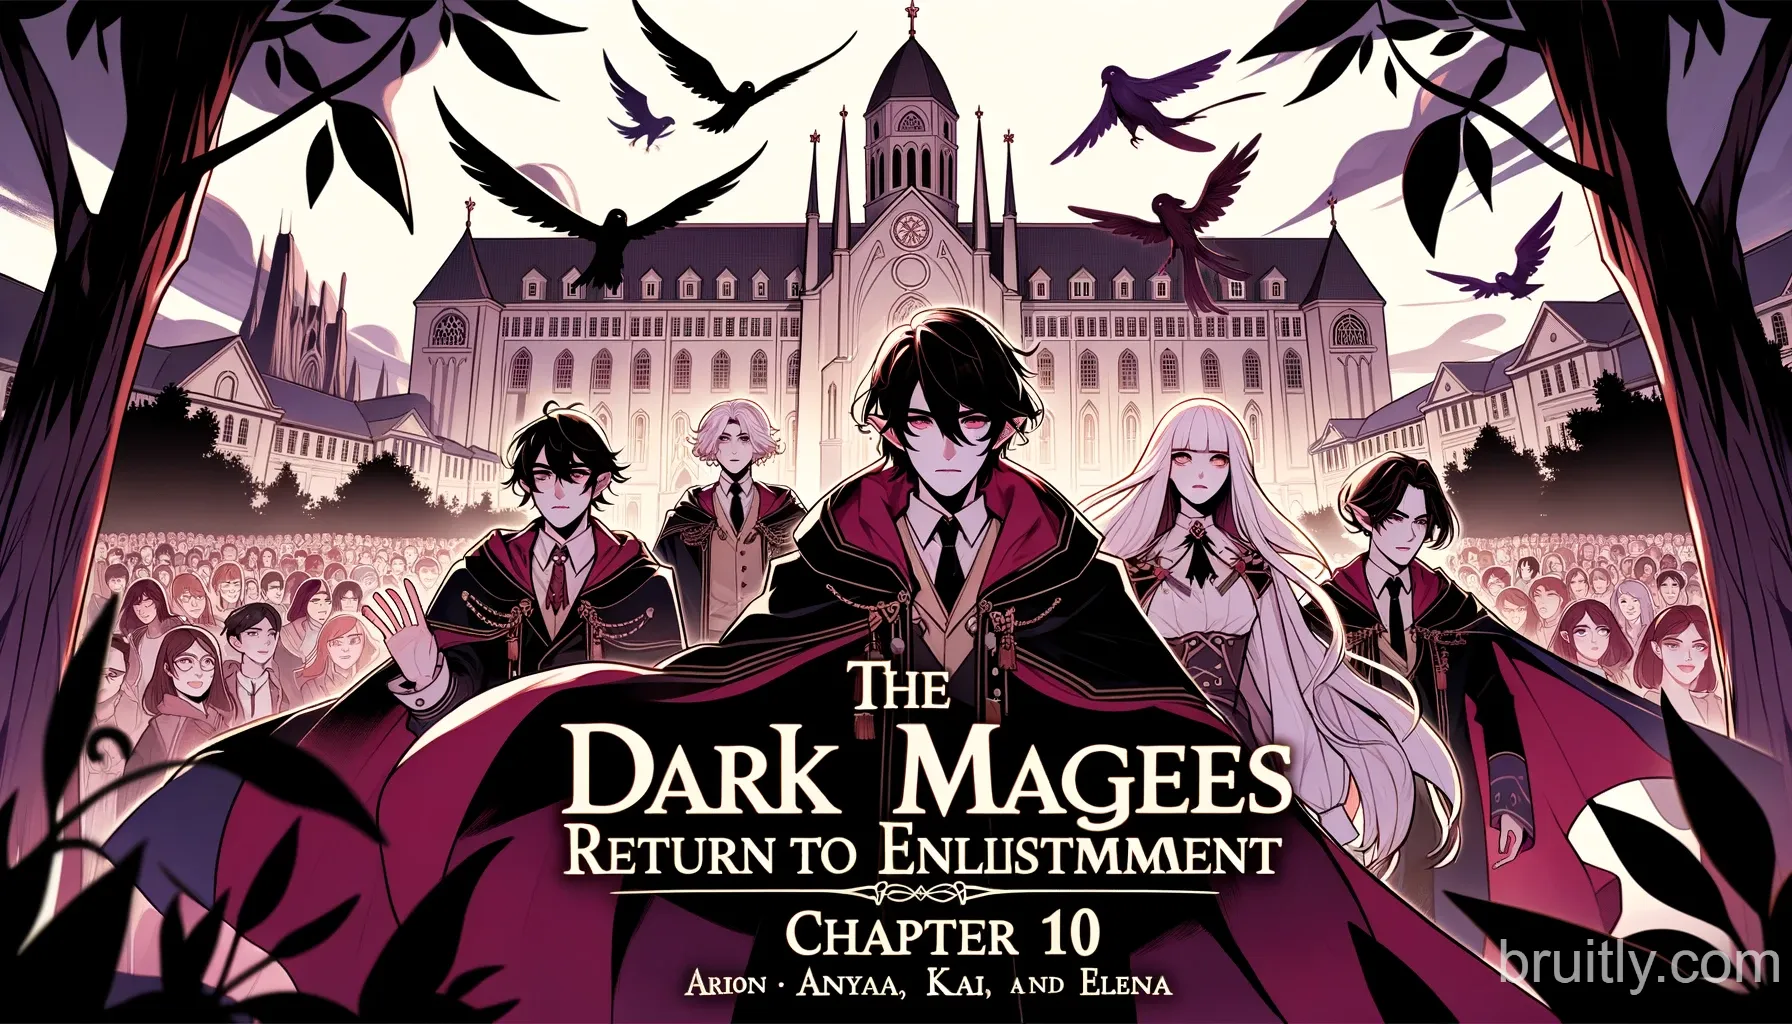 The Dark Mages Return to Enlistment Chapter